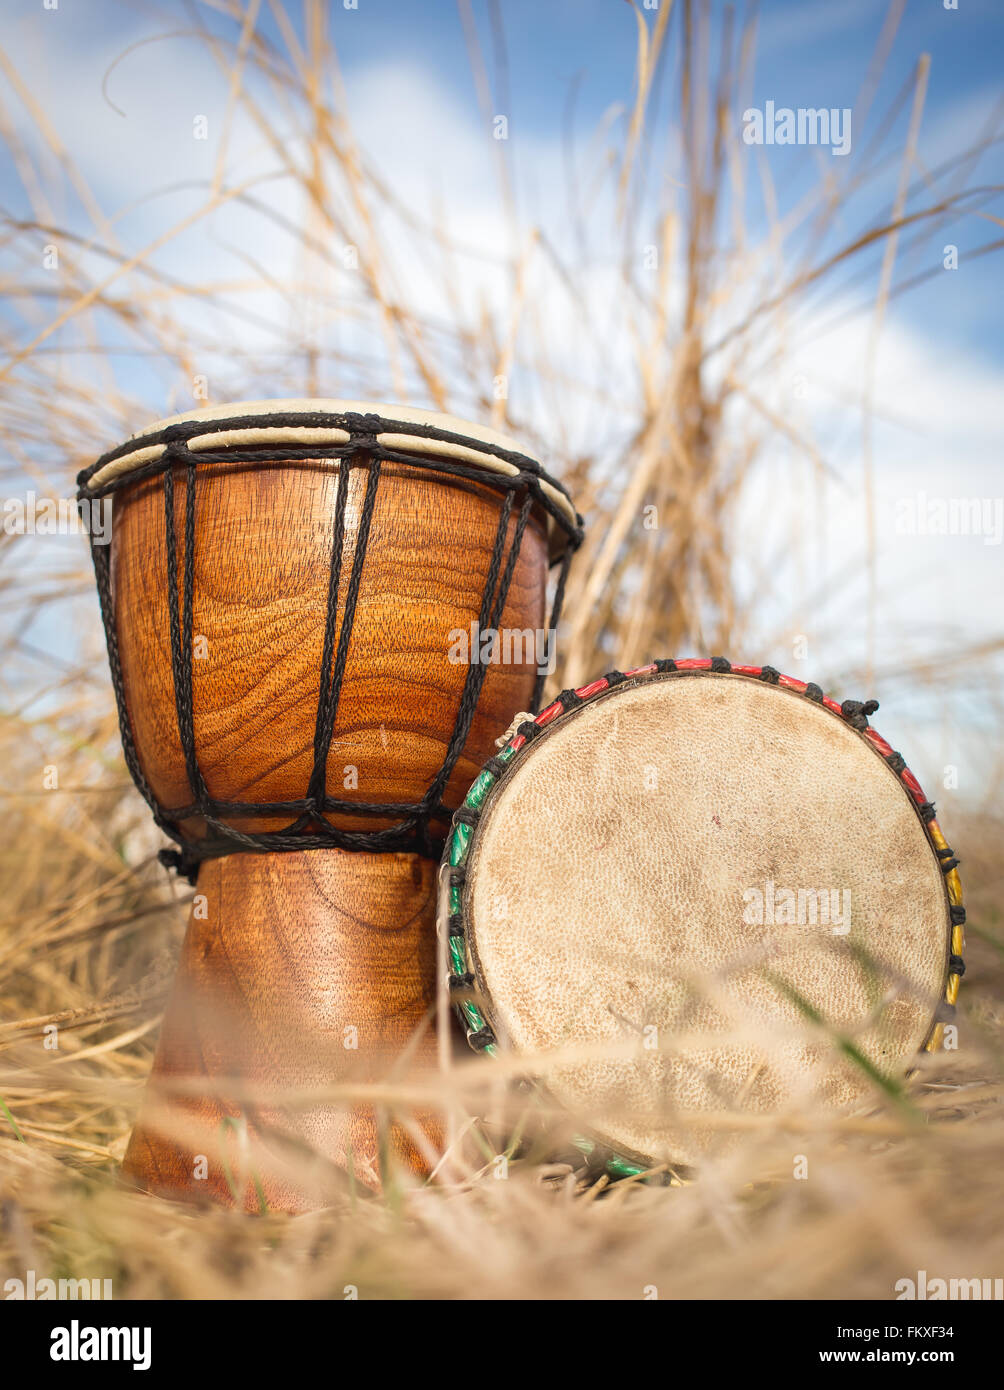 African hand percussion instrument - Djembe drums Stock Photo